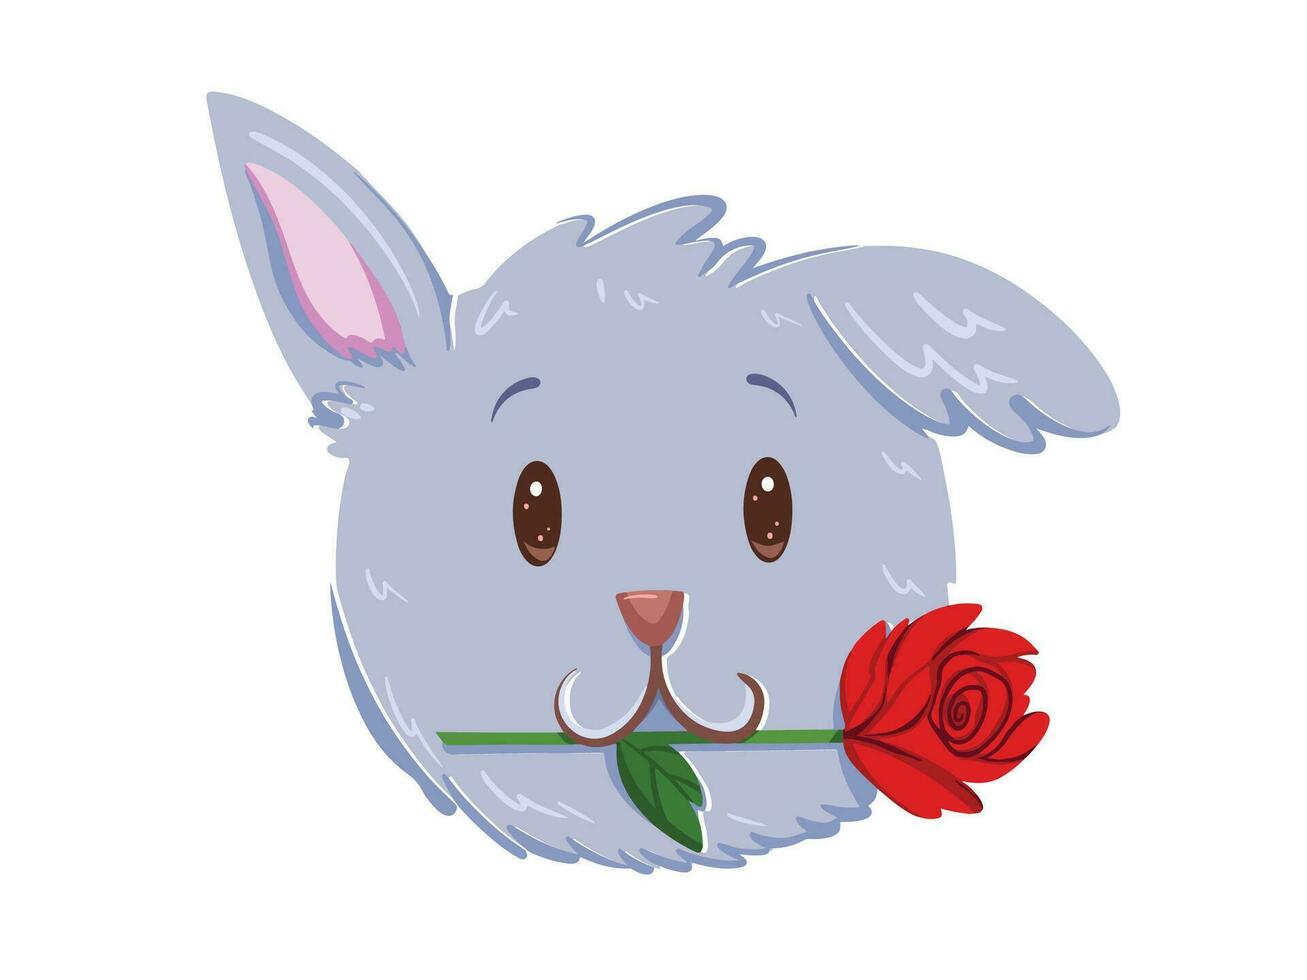 Cute kawaii gray puppy dog face portrait biting on one rose flower vector illustration isolated on white horizontal background. Simple flat cartoon art styled valentines day themed drawing.